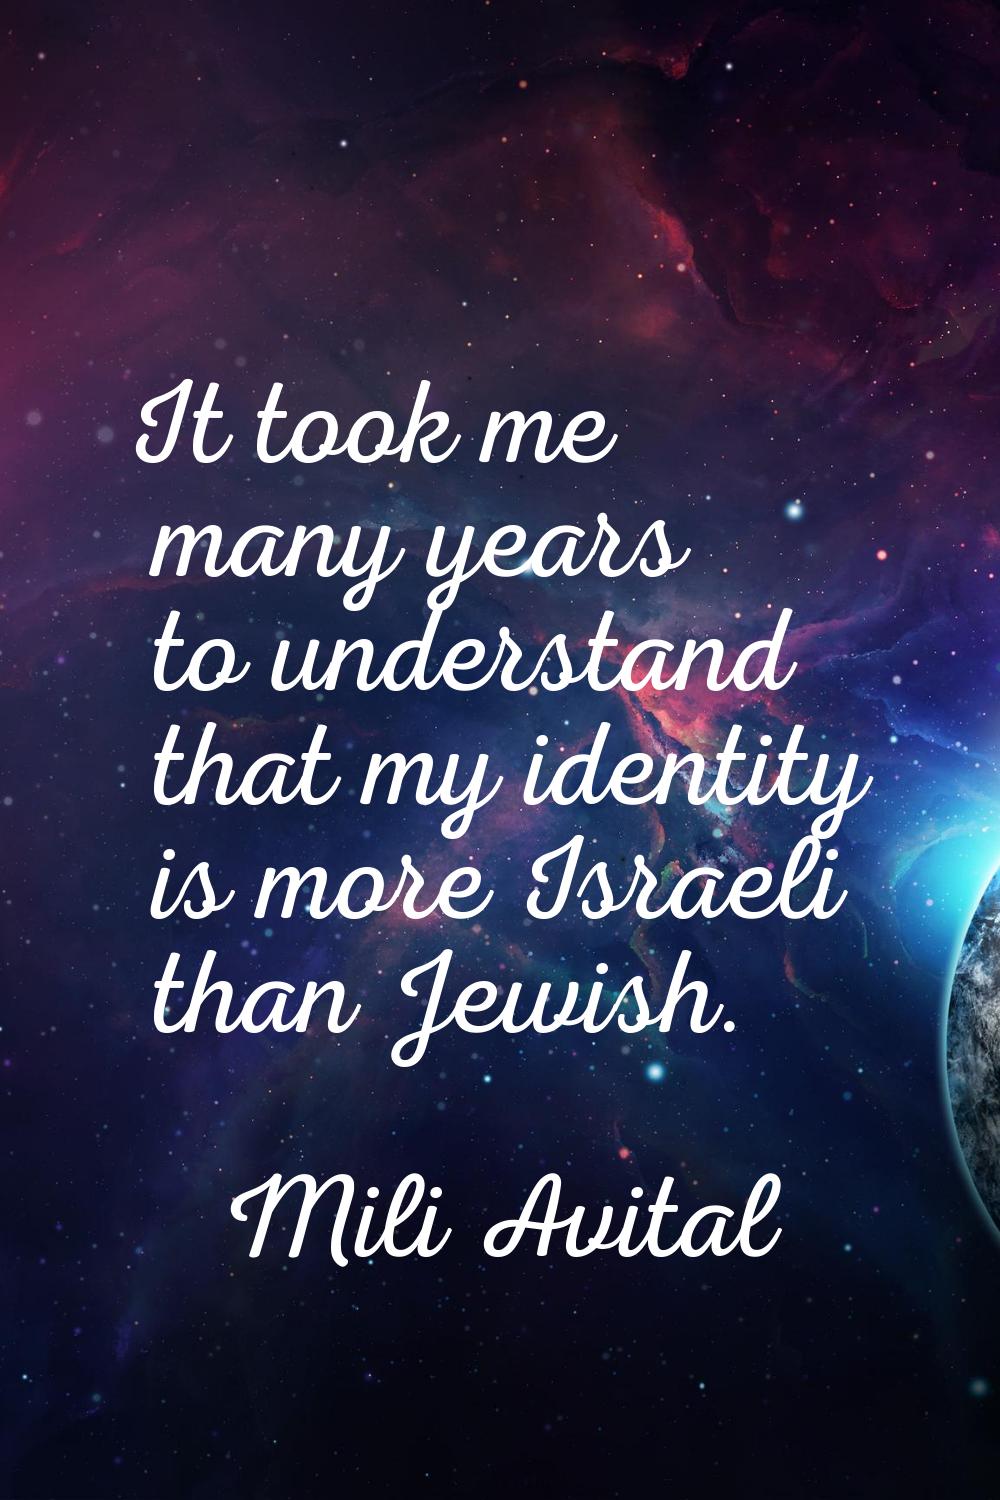 It took me many years to understand that my identity is more Israeli than Jewish.